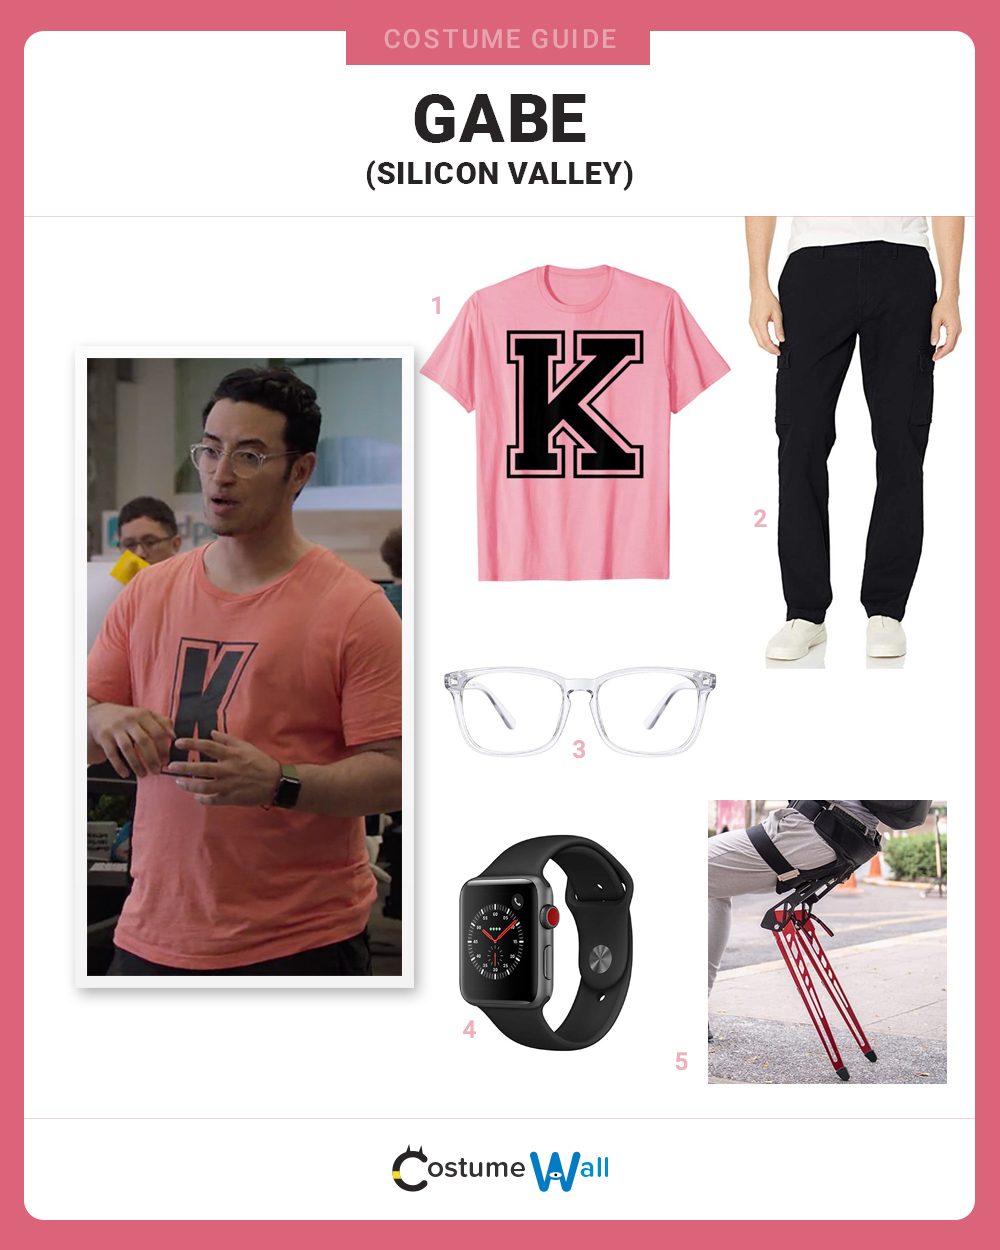 Dress Like Gabe From Silicon Valley Costume Halloween And Cosplay Guides